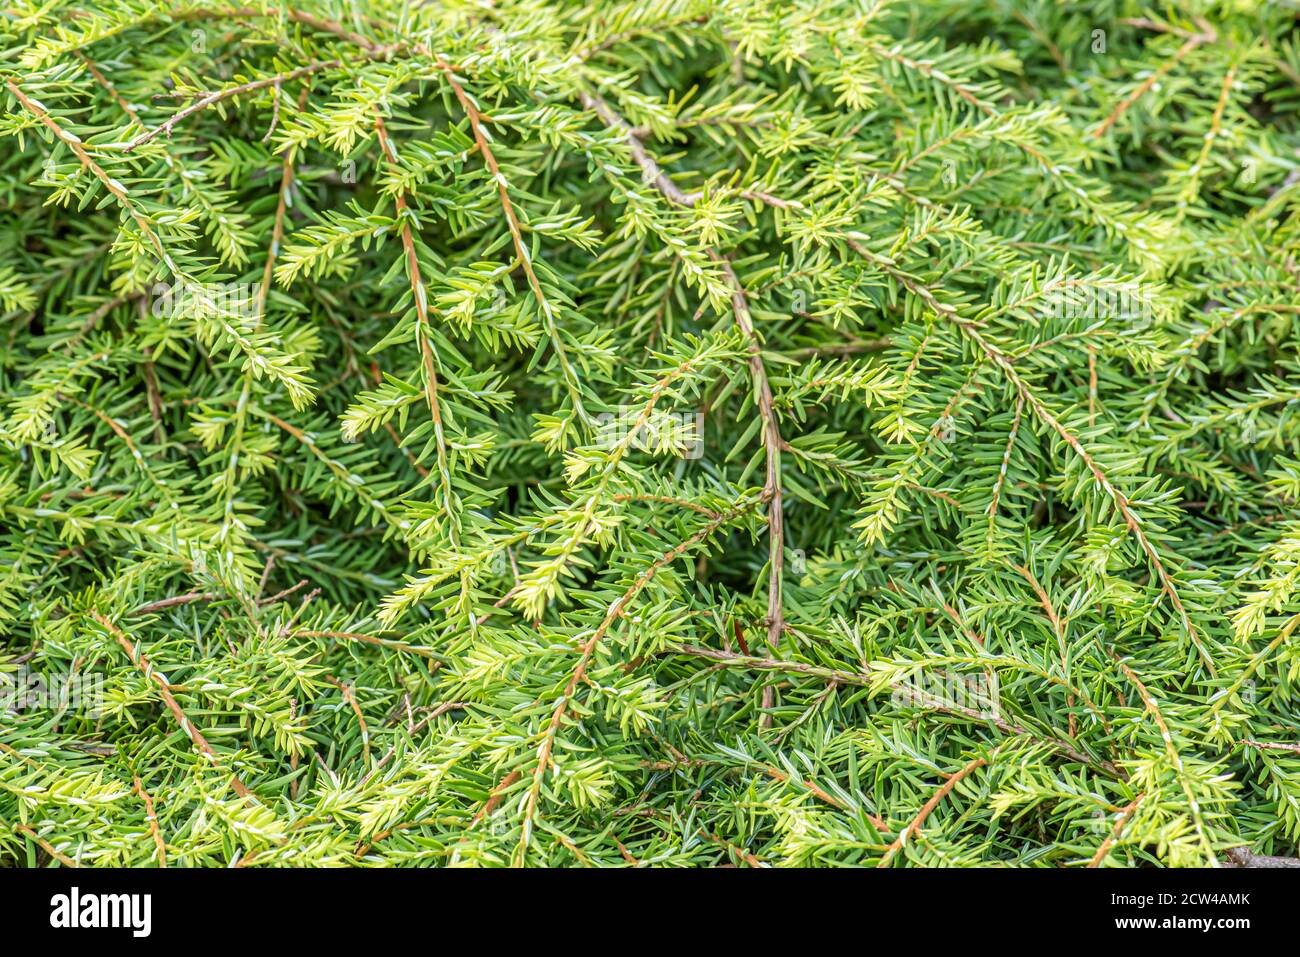 Tsuga canadensis also known as Canadian hemlock Stock Photo